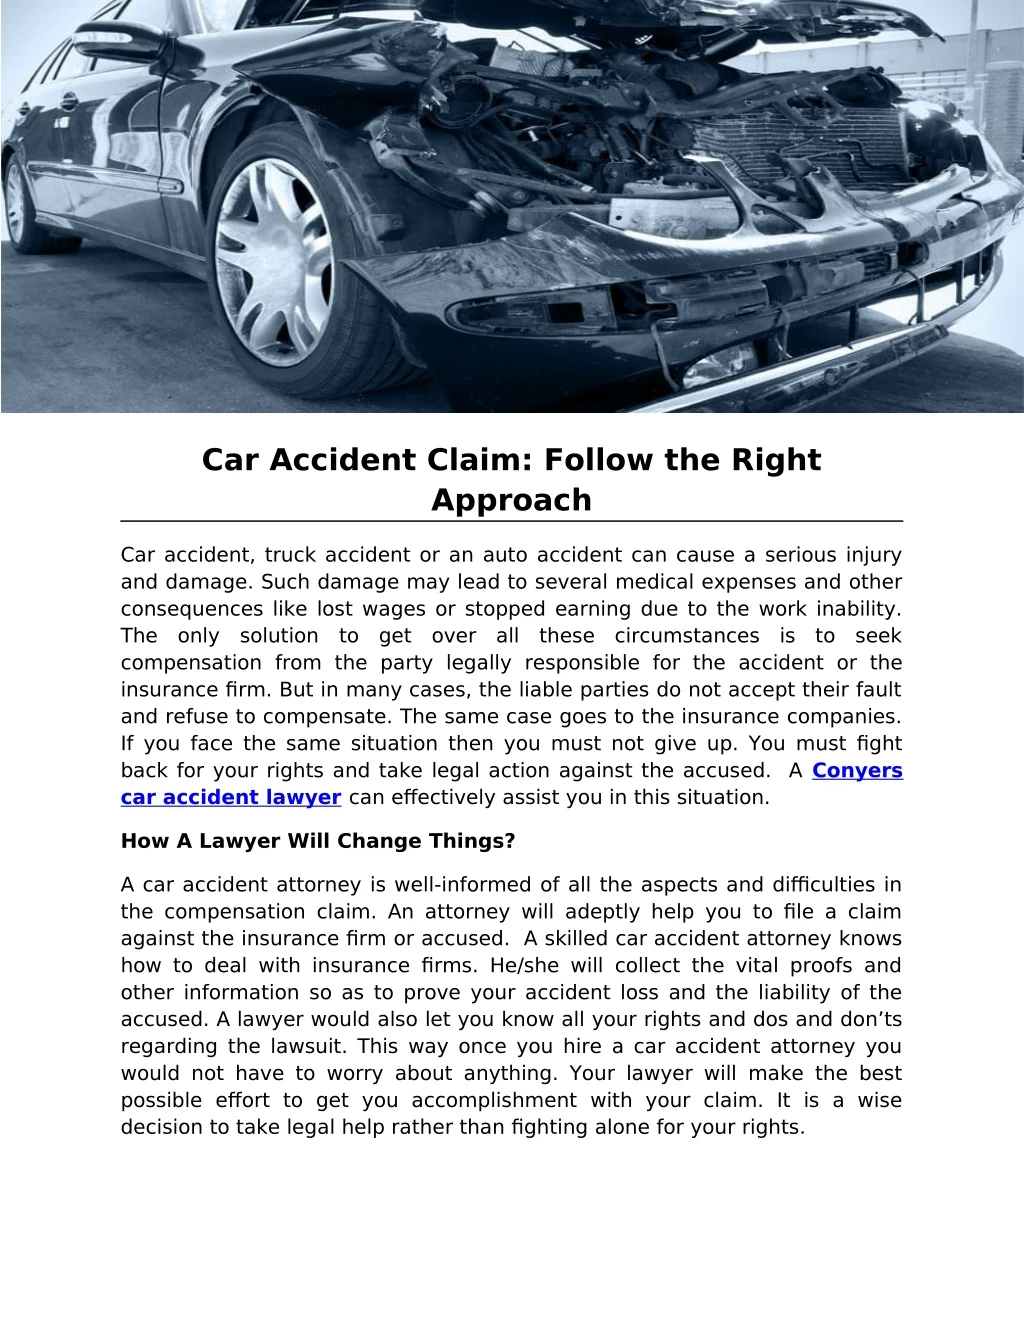 car accident claim follow the right approach